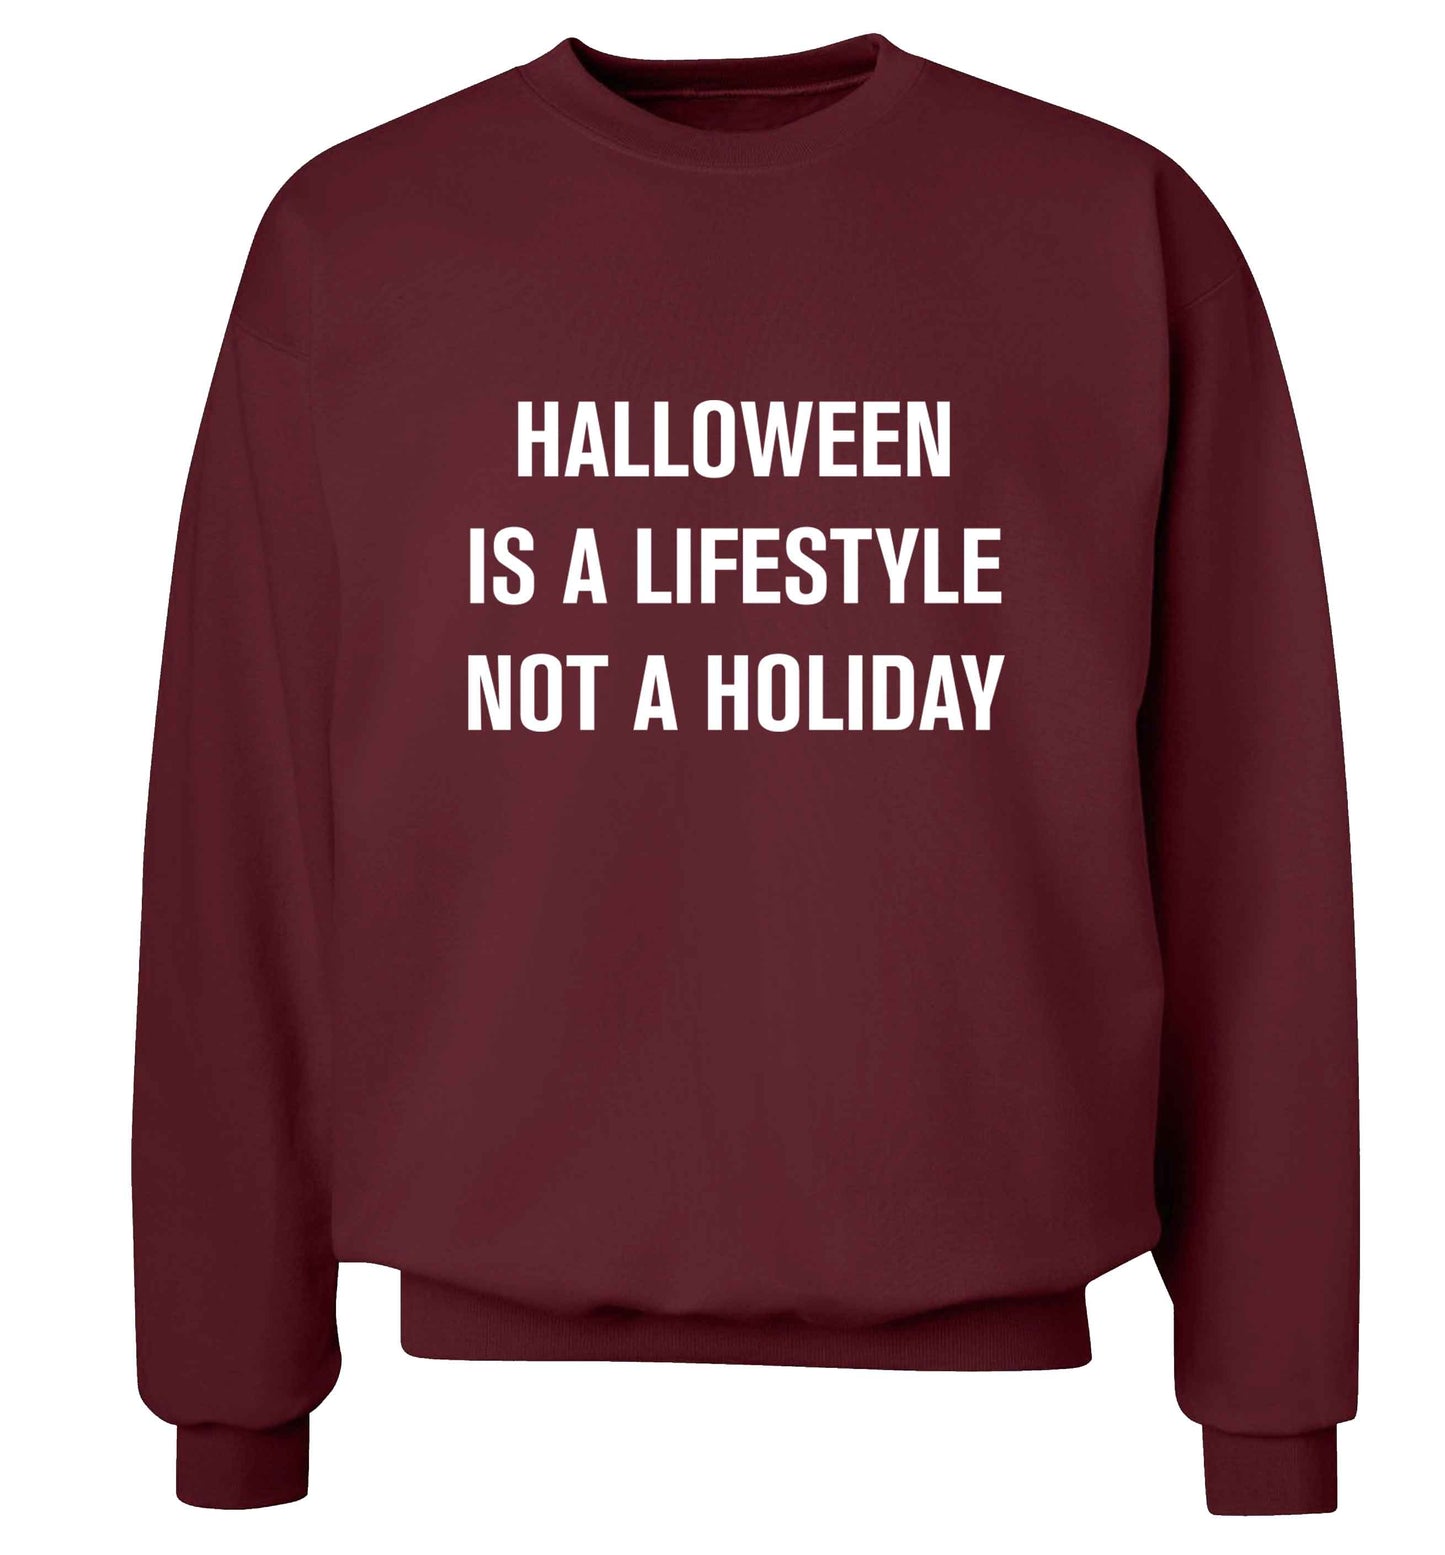 Halloween is a lifestyle not a holiday adult's unisex maroon sweater 2XL